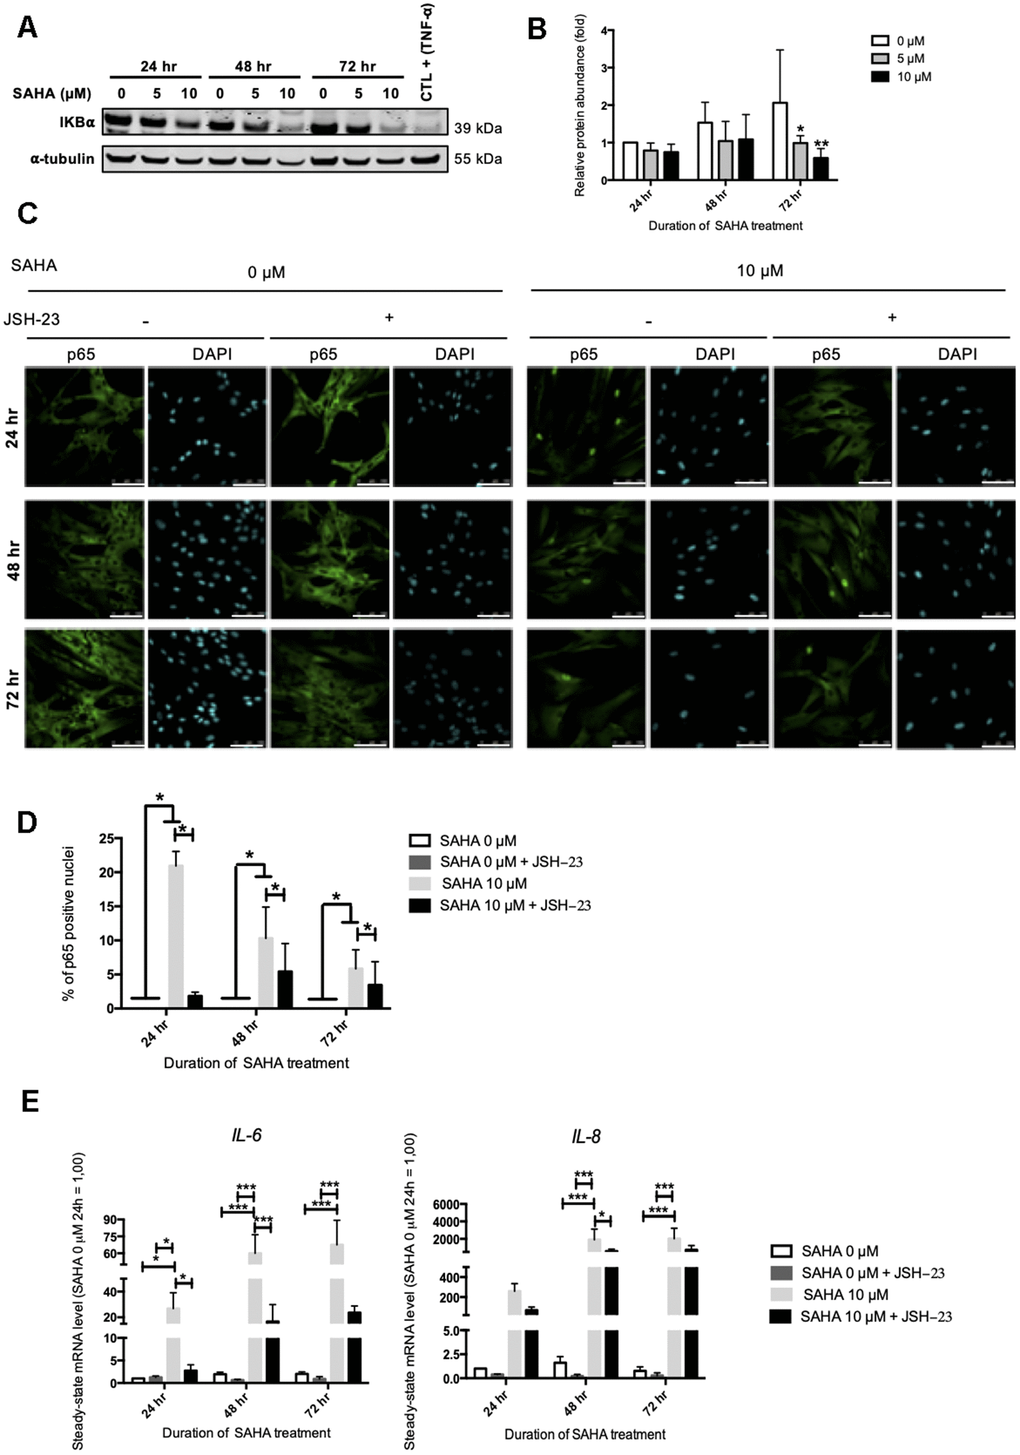 IL-6 and IL-8 expression observed after SAHA treatment is partly dependent on NF-κB activation. Cells at early passage were treated with 0, 5 or 10 μM of SAHA during 24, 48 or 72 hr in combination or not with JSH-23 treatment (NF-κB inhibitor) during 24 hr. (A) Representative Western blots showing IĸBα total protein abundance after SAHA treatment. AG04431 dermal fibroblasts treated with 20 ng/mL of TNF-α during 20 minutes were used as positive control for IĸBα degradation. α-tubulin was used as loading control. (B) Quantification of the relative protein abundance of IĸBα. Signal intensities were quantified and normalized relative to the abundance of α-tubulin and are expressed relative to the control condition (0 μM SAHA, 24 hr). (C) Immunofluorescence analysis of p65 (green) nuclear translocation. Nuclei were labelled with DAPI (blue). Cells were visualized with confocal microscopy (scale bar = 50 μM). (D) Quantification of the percentage of p65 positive nuclei. (E) Steady-state mRNA level of IL-6 and IL-8. GAPDH was used as housekeeping gene. Results are expressed as fold induction in comparison with control fibroblasts (0 μM SAHA, 24 hr). Statistical analyses were performed using an ANOVA II (*: p